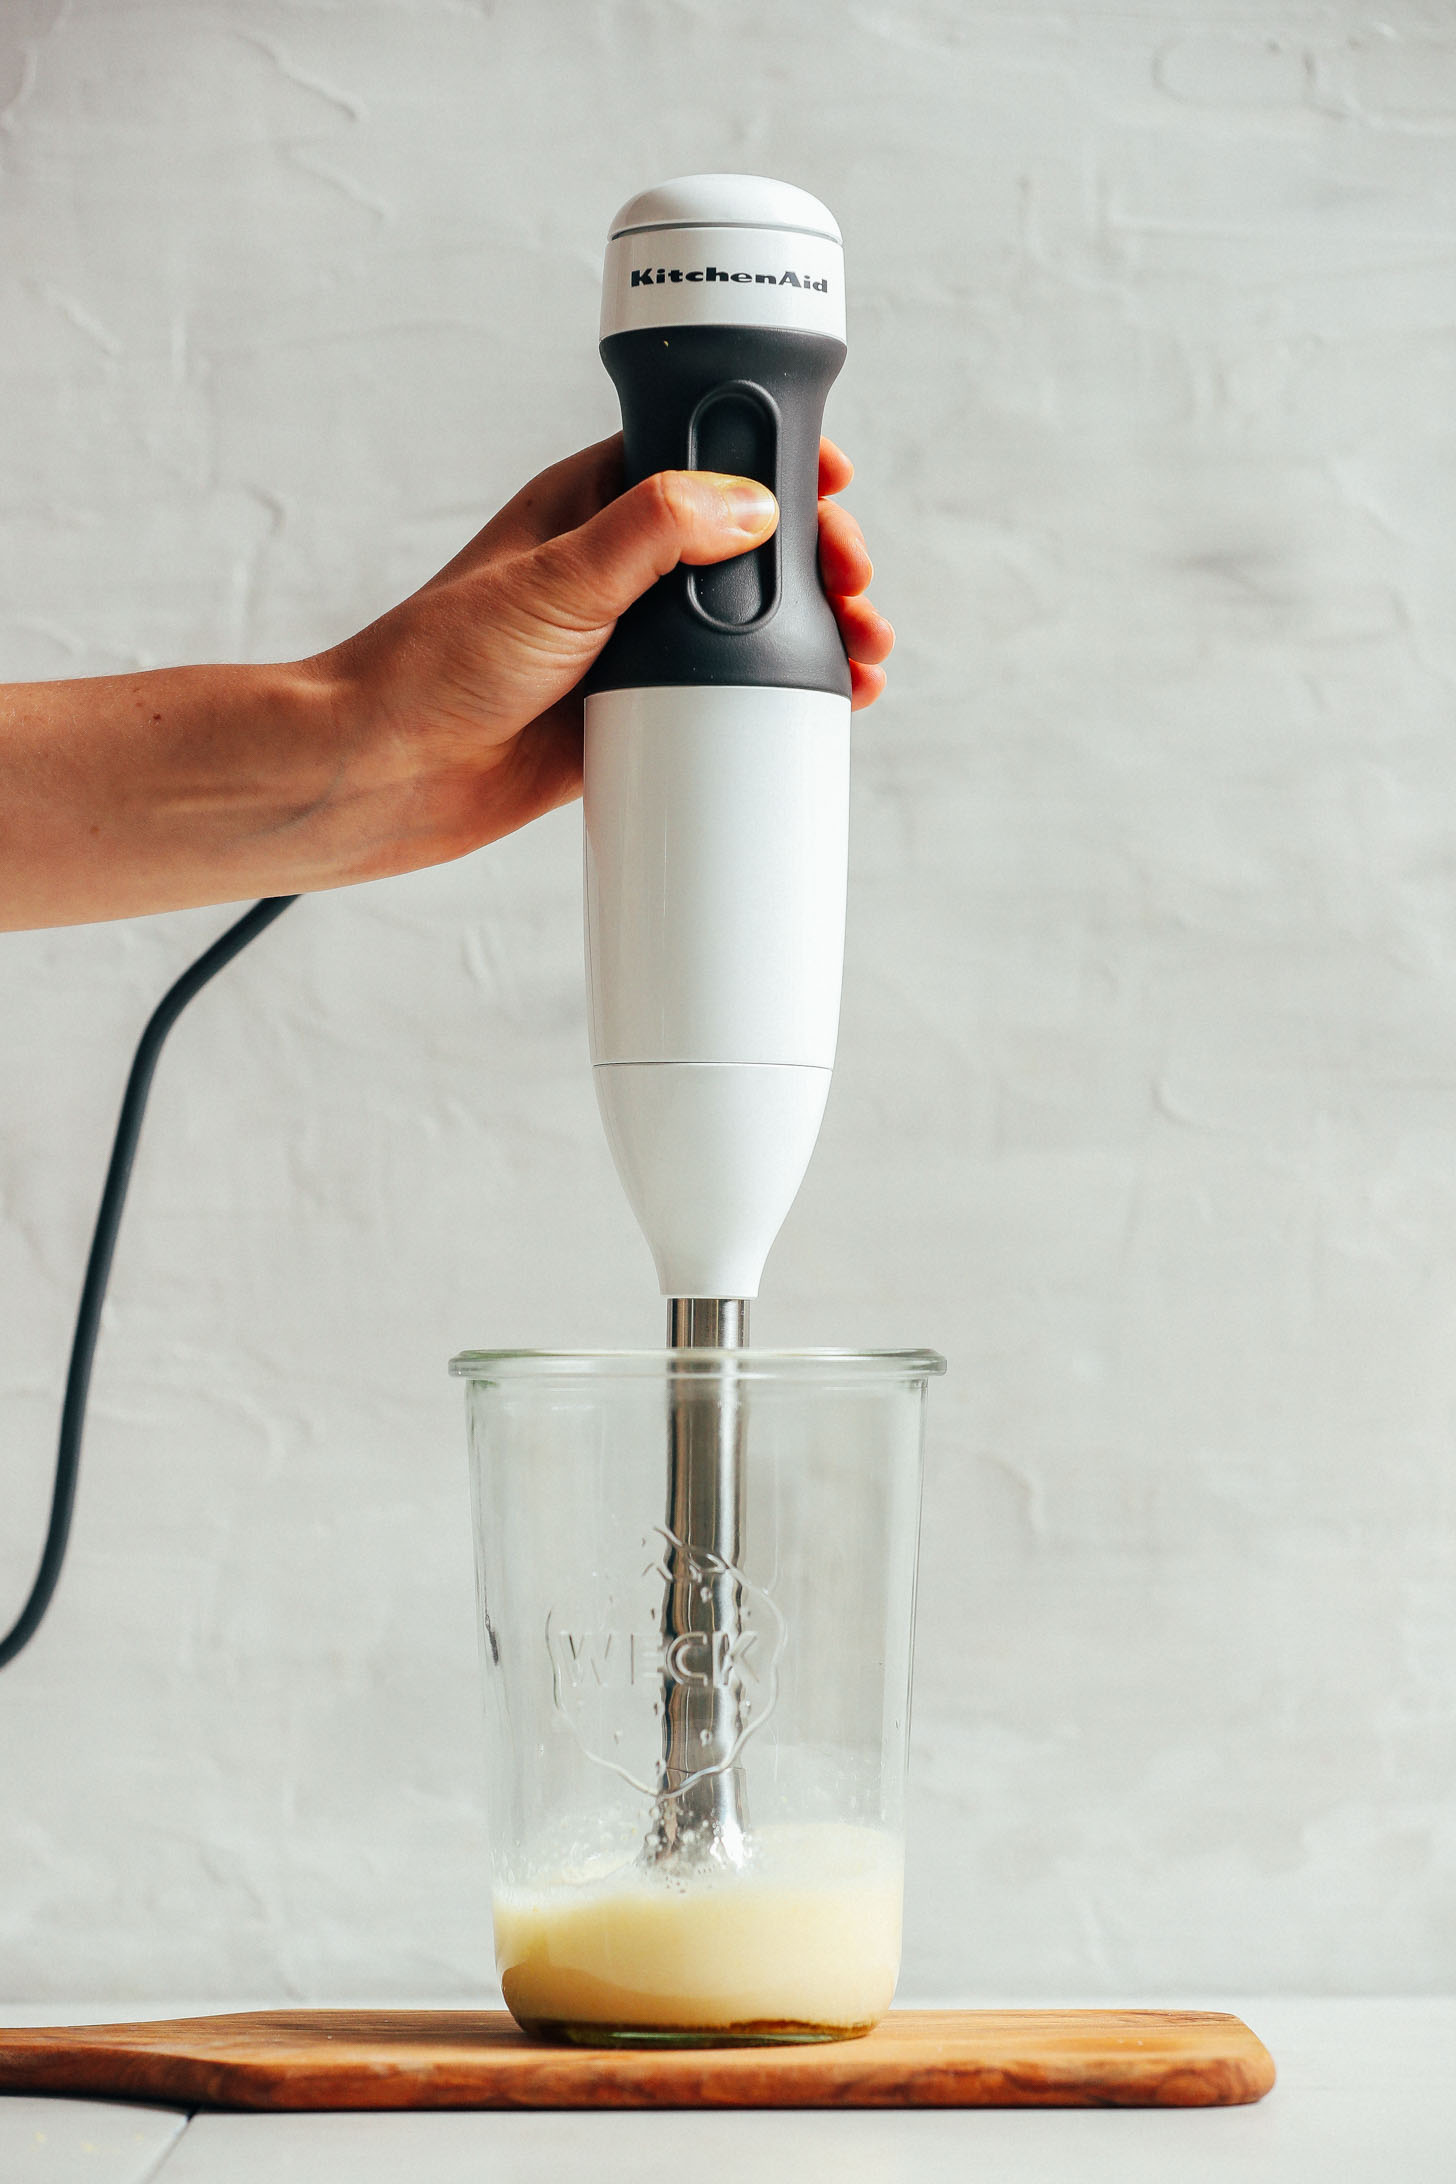 Using an immersion blender to make our homemade vegan mayo recipe